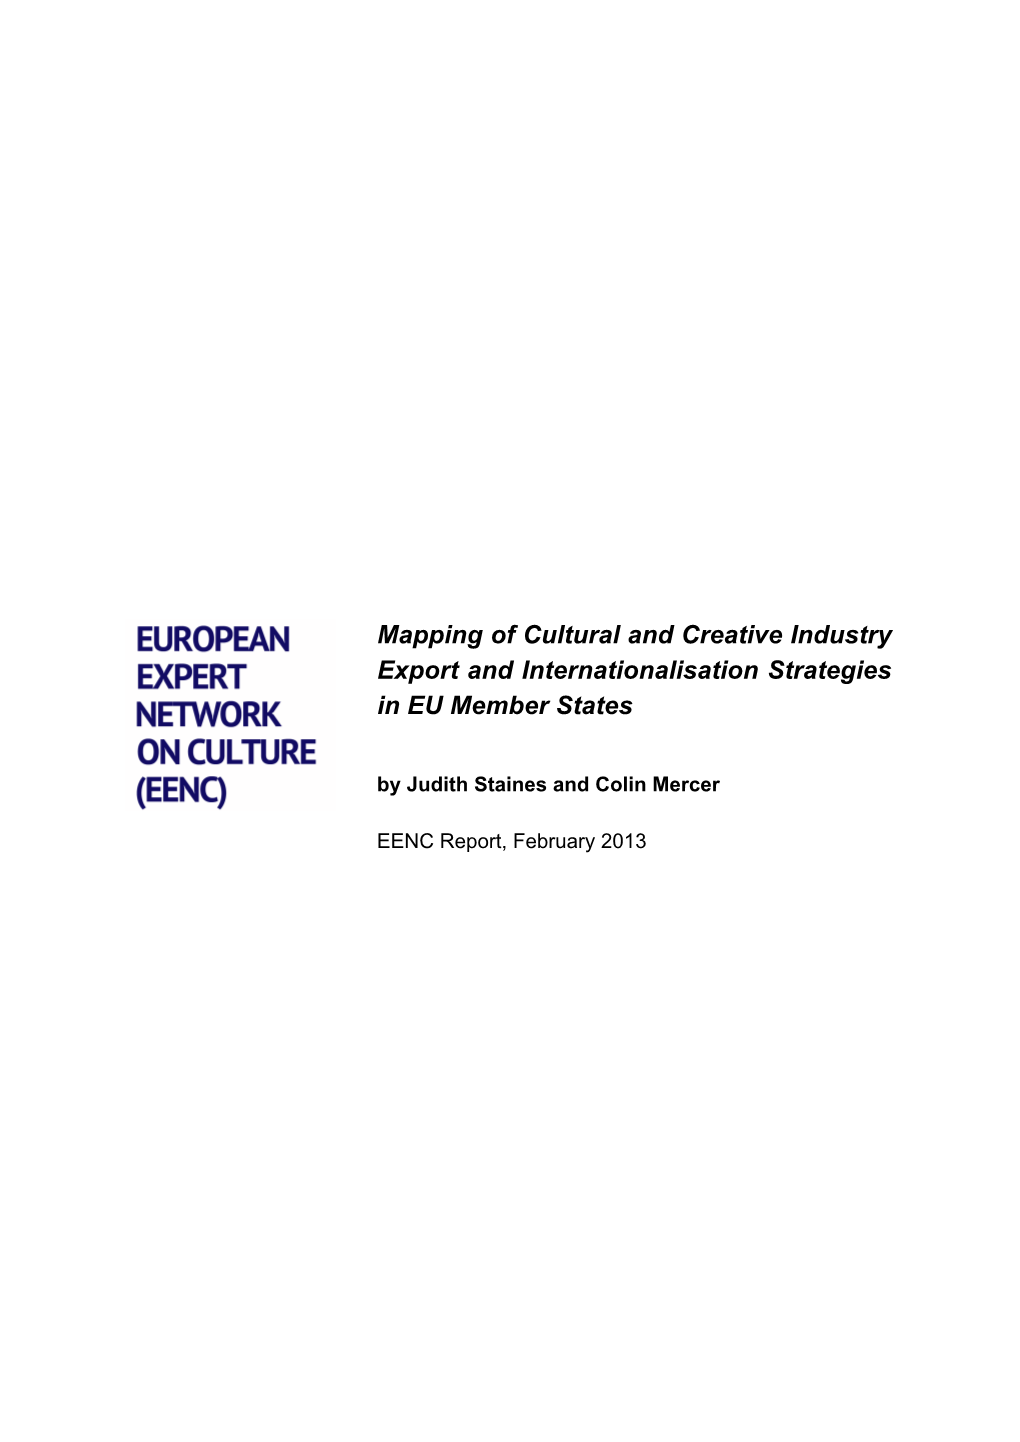 Mapping of Cultural and Creative Industry Export and Internationalisation Strategies in EU Member States